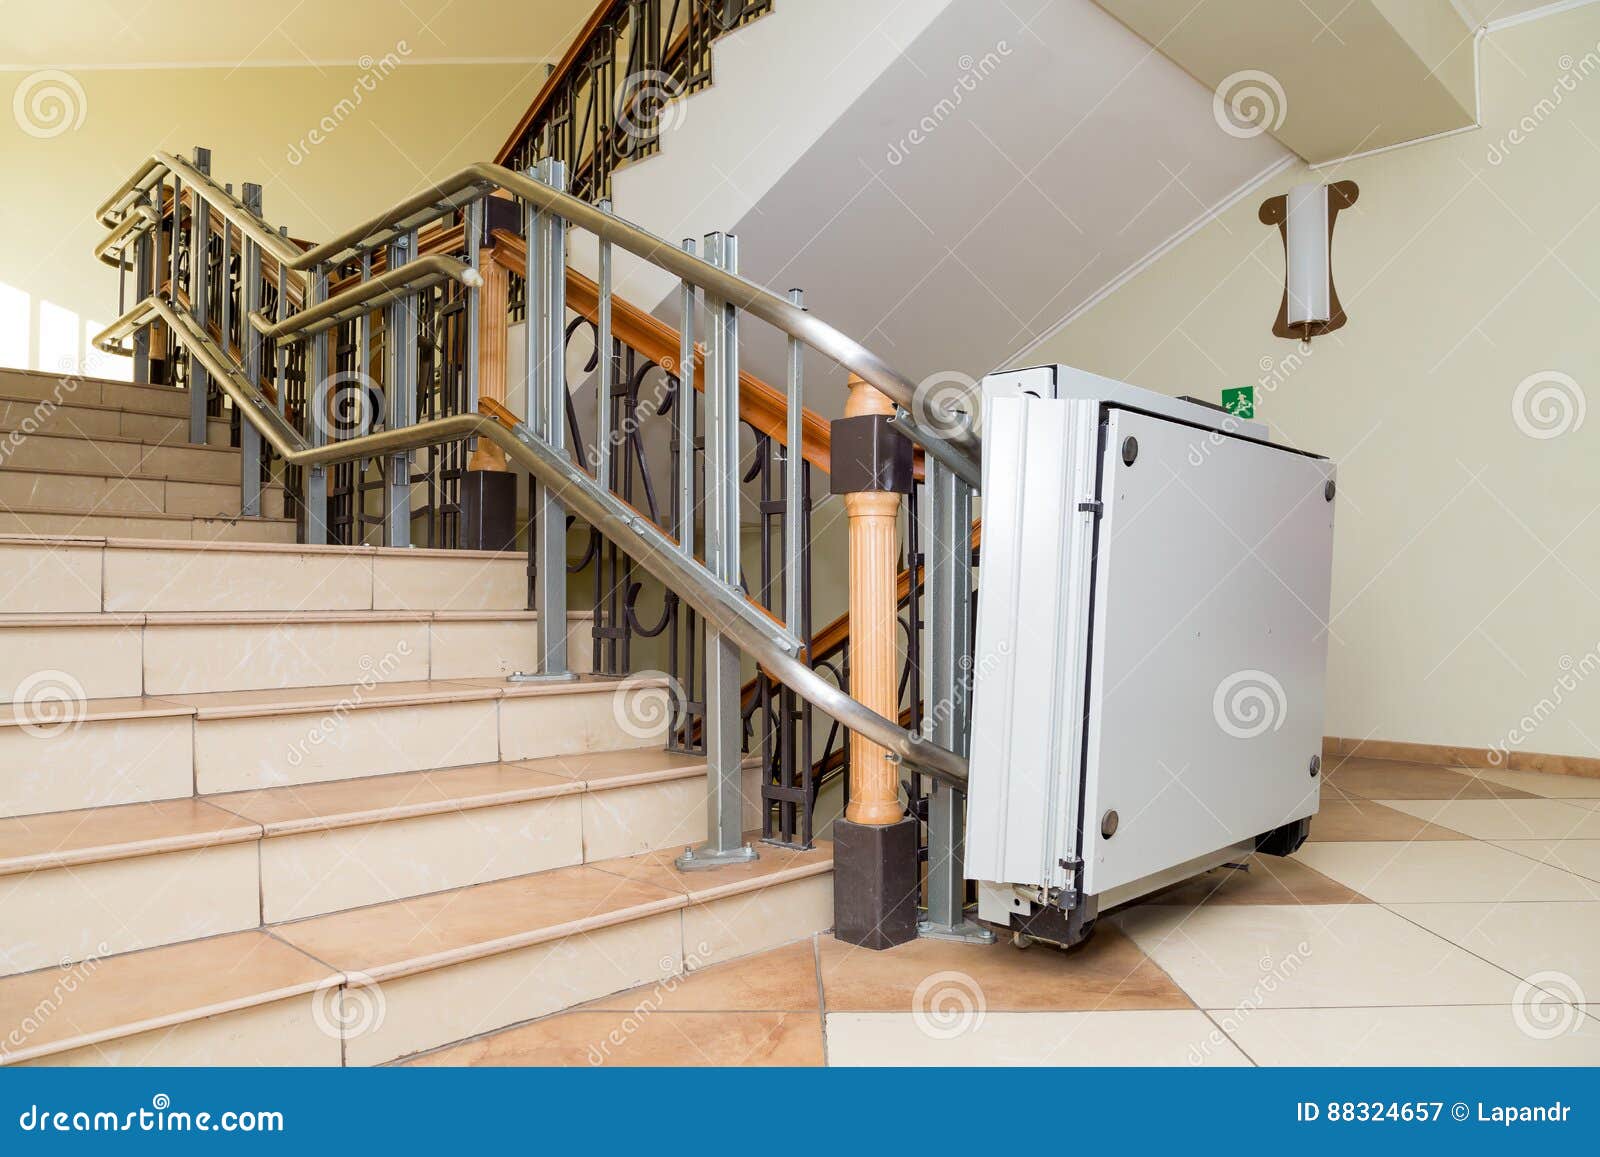 stair lift for the disabled. stairs of public building